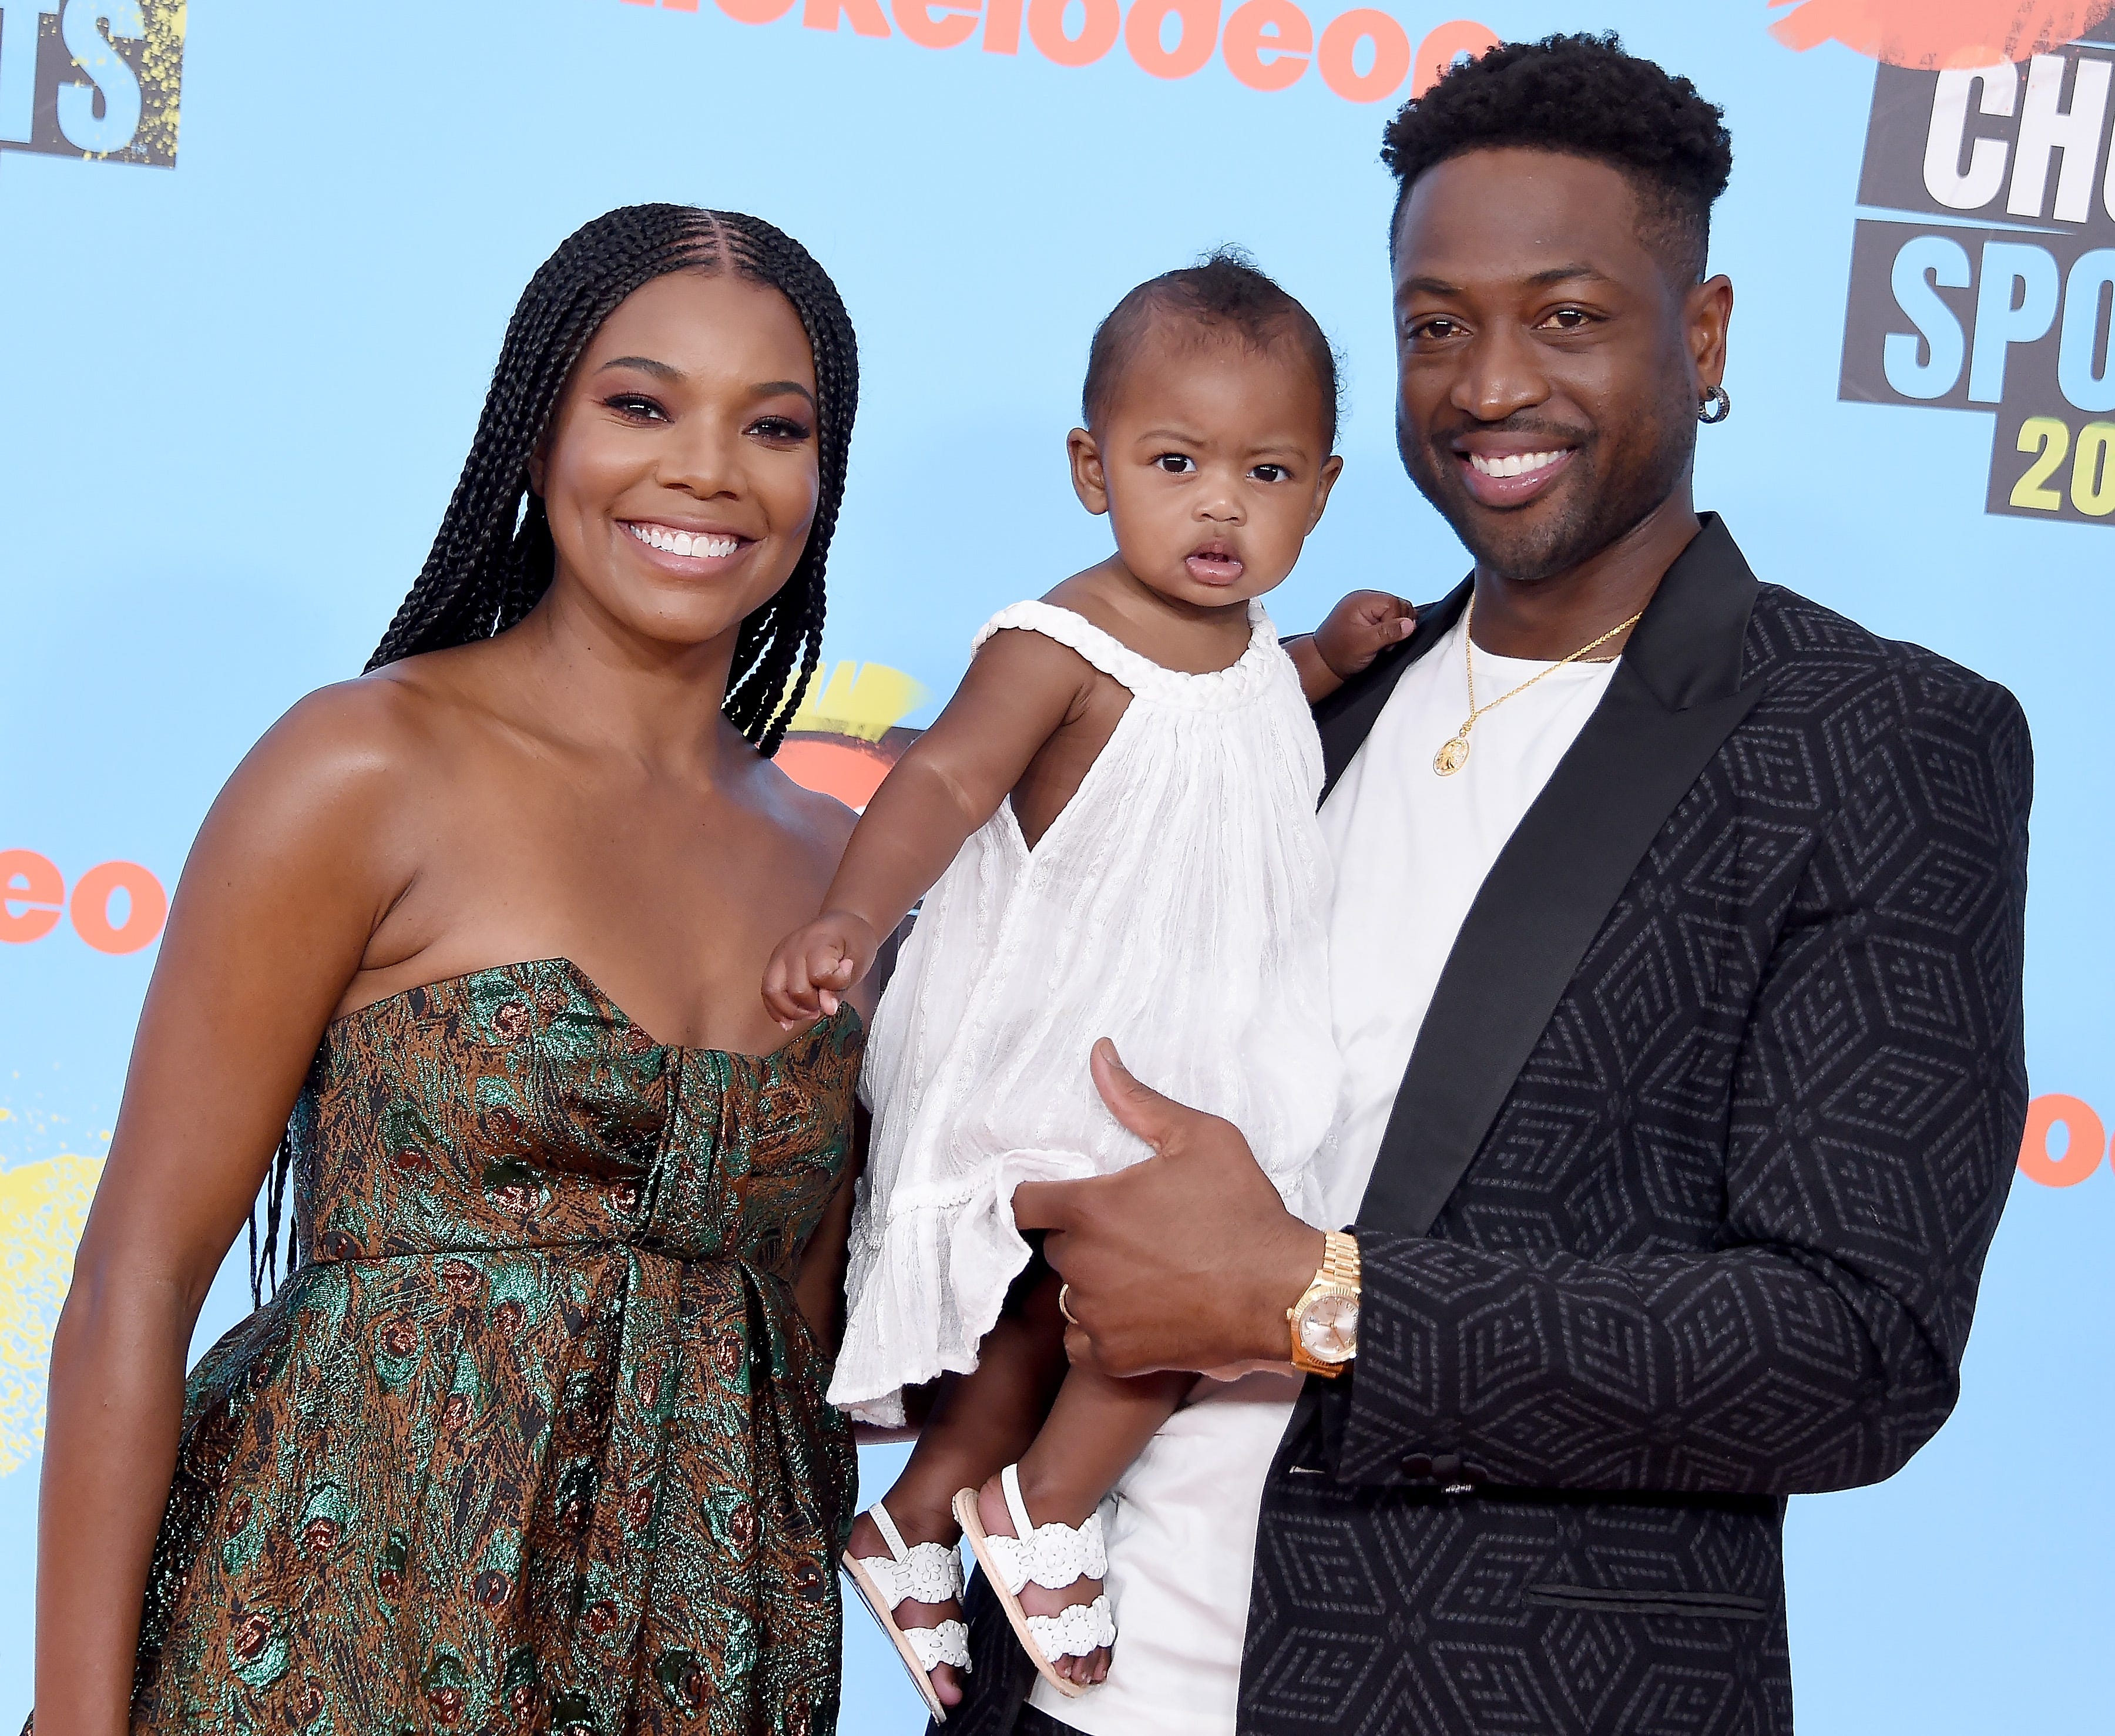 Gabrielle Union Broken After Dwyane Wade Fathered Child